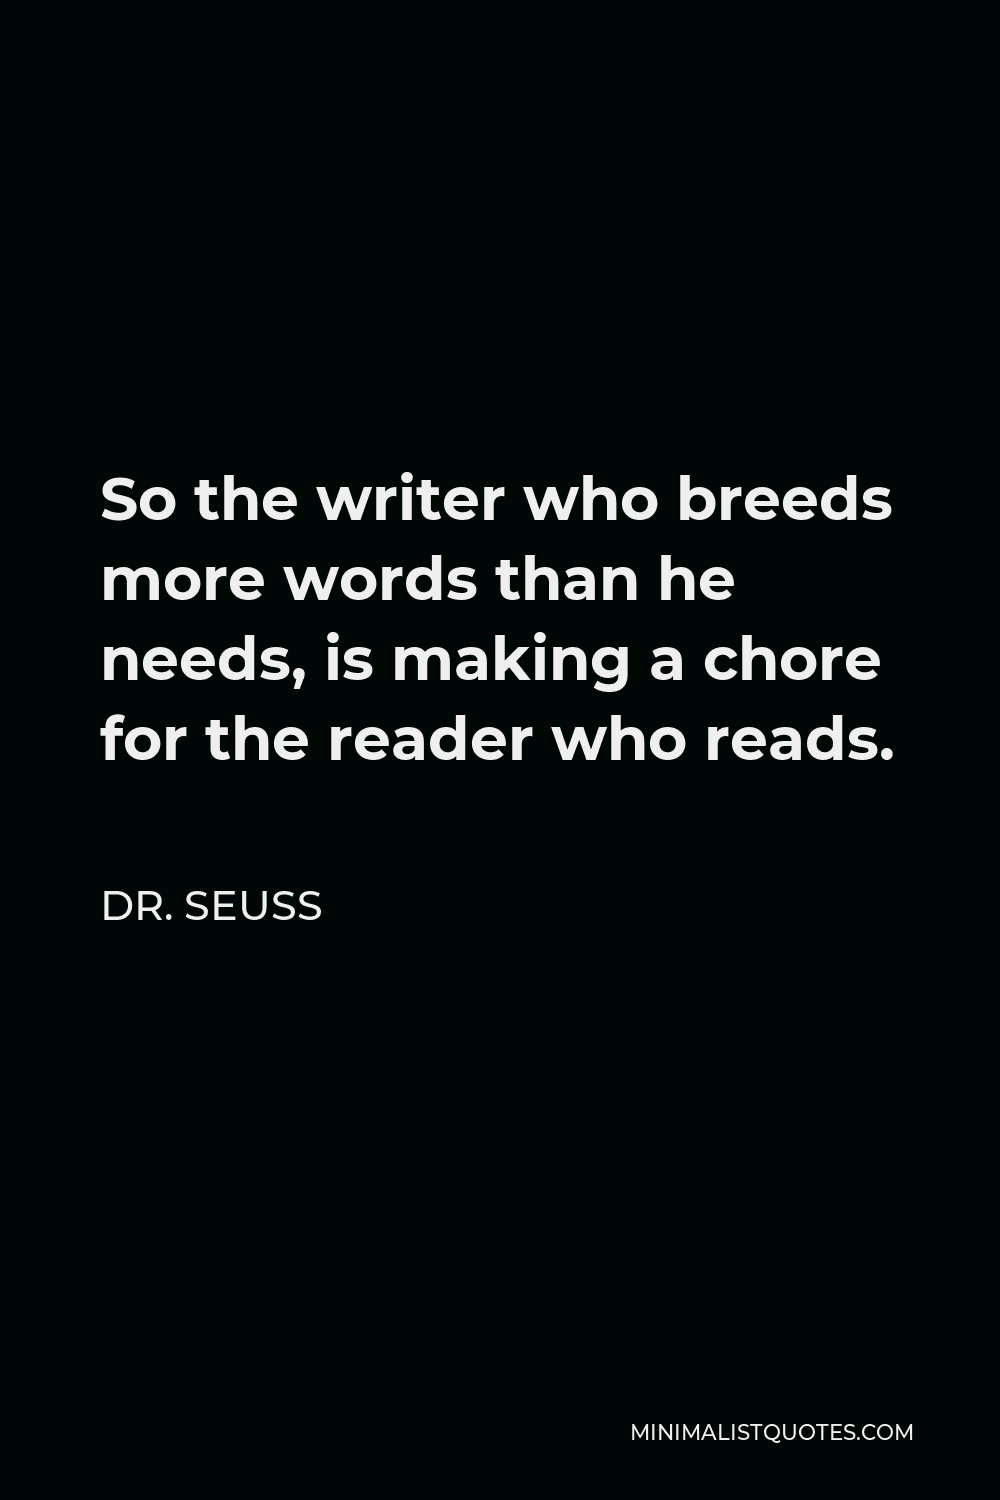 Dr. Seuss Quote - So the writer who breeds more words than he needs, is making a chore for the reader who reads.